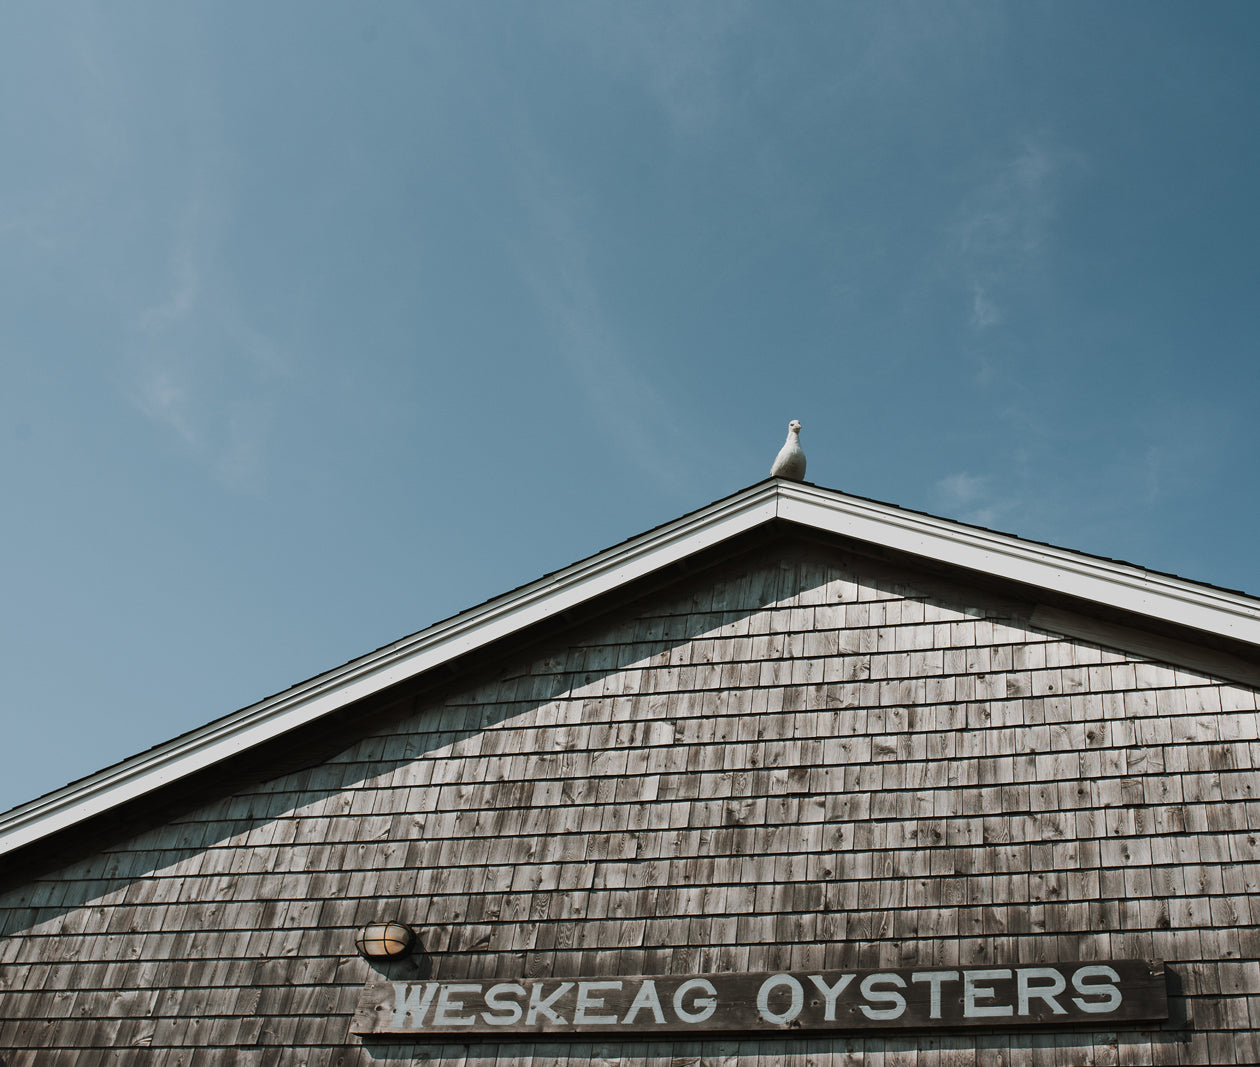 Weskeag Oysters from South Thomaston, Maine